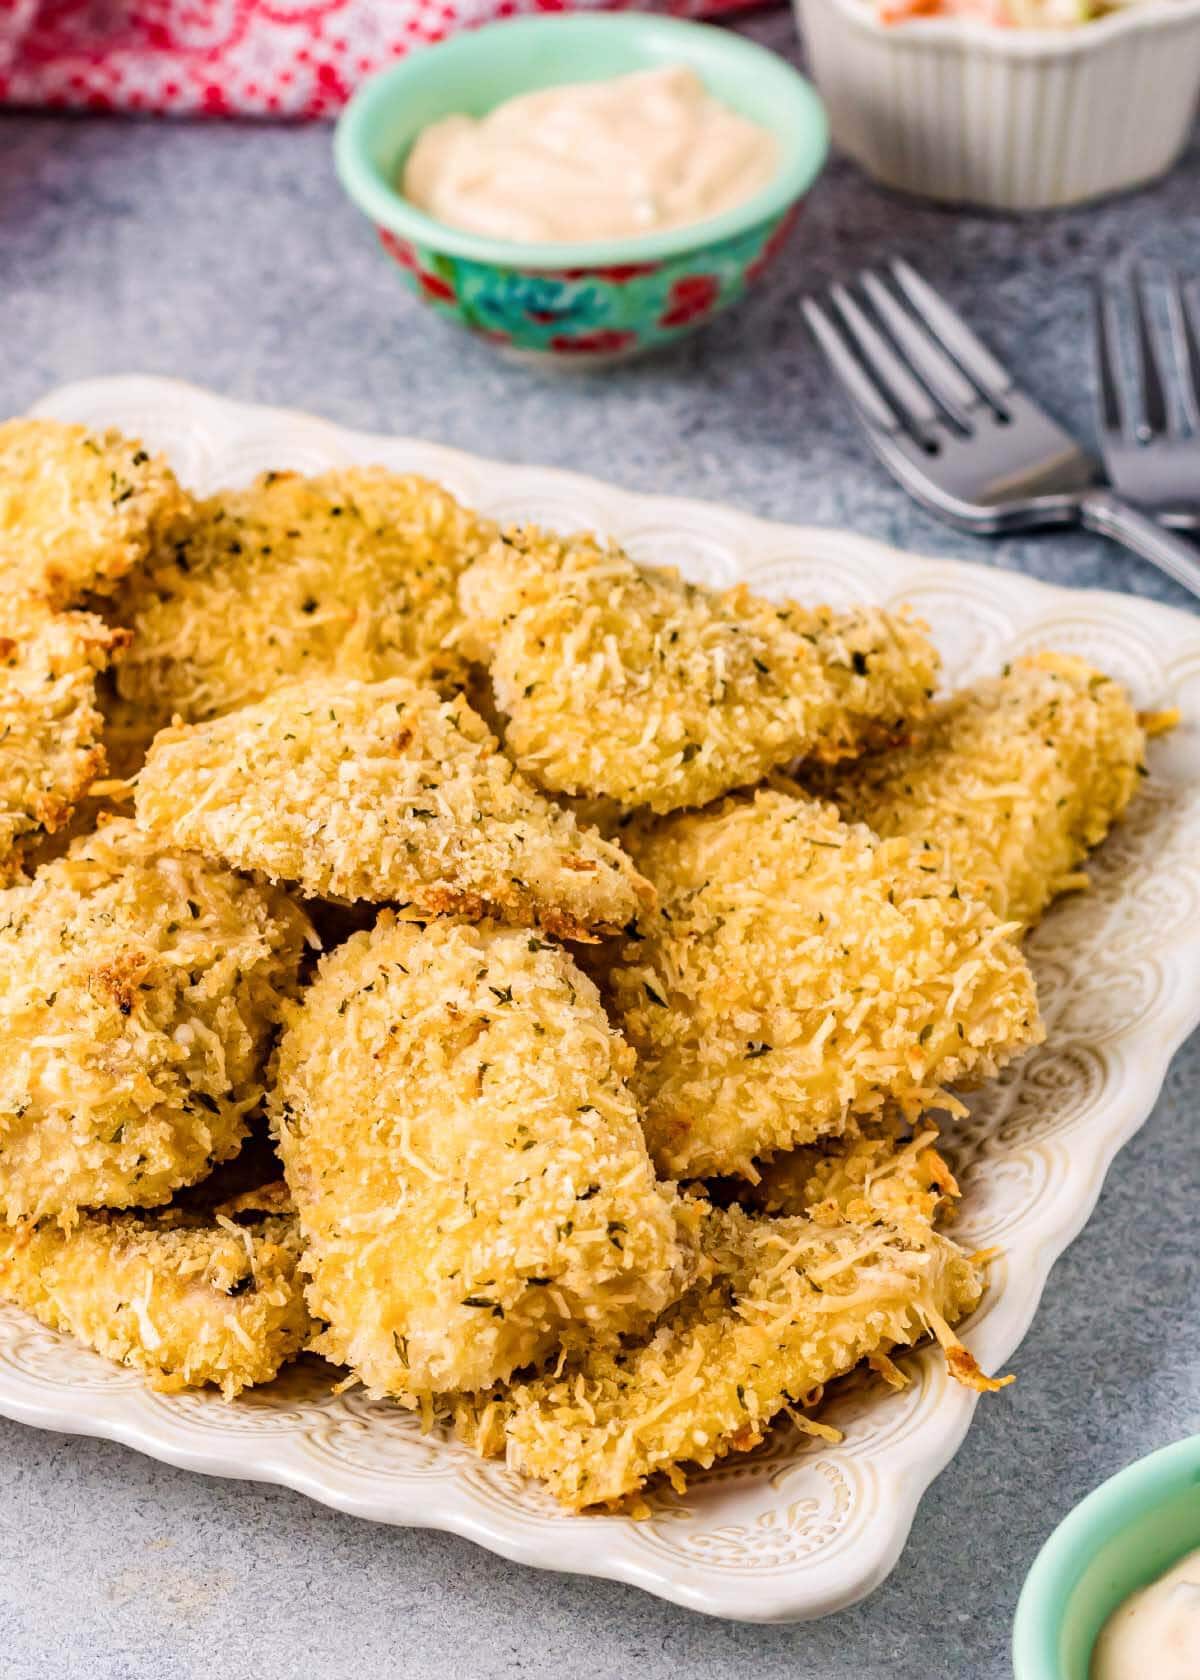 Baked Parmesan Crusted Fish on square plate